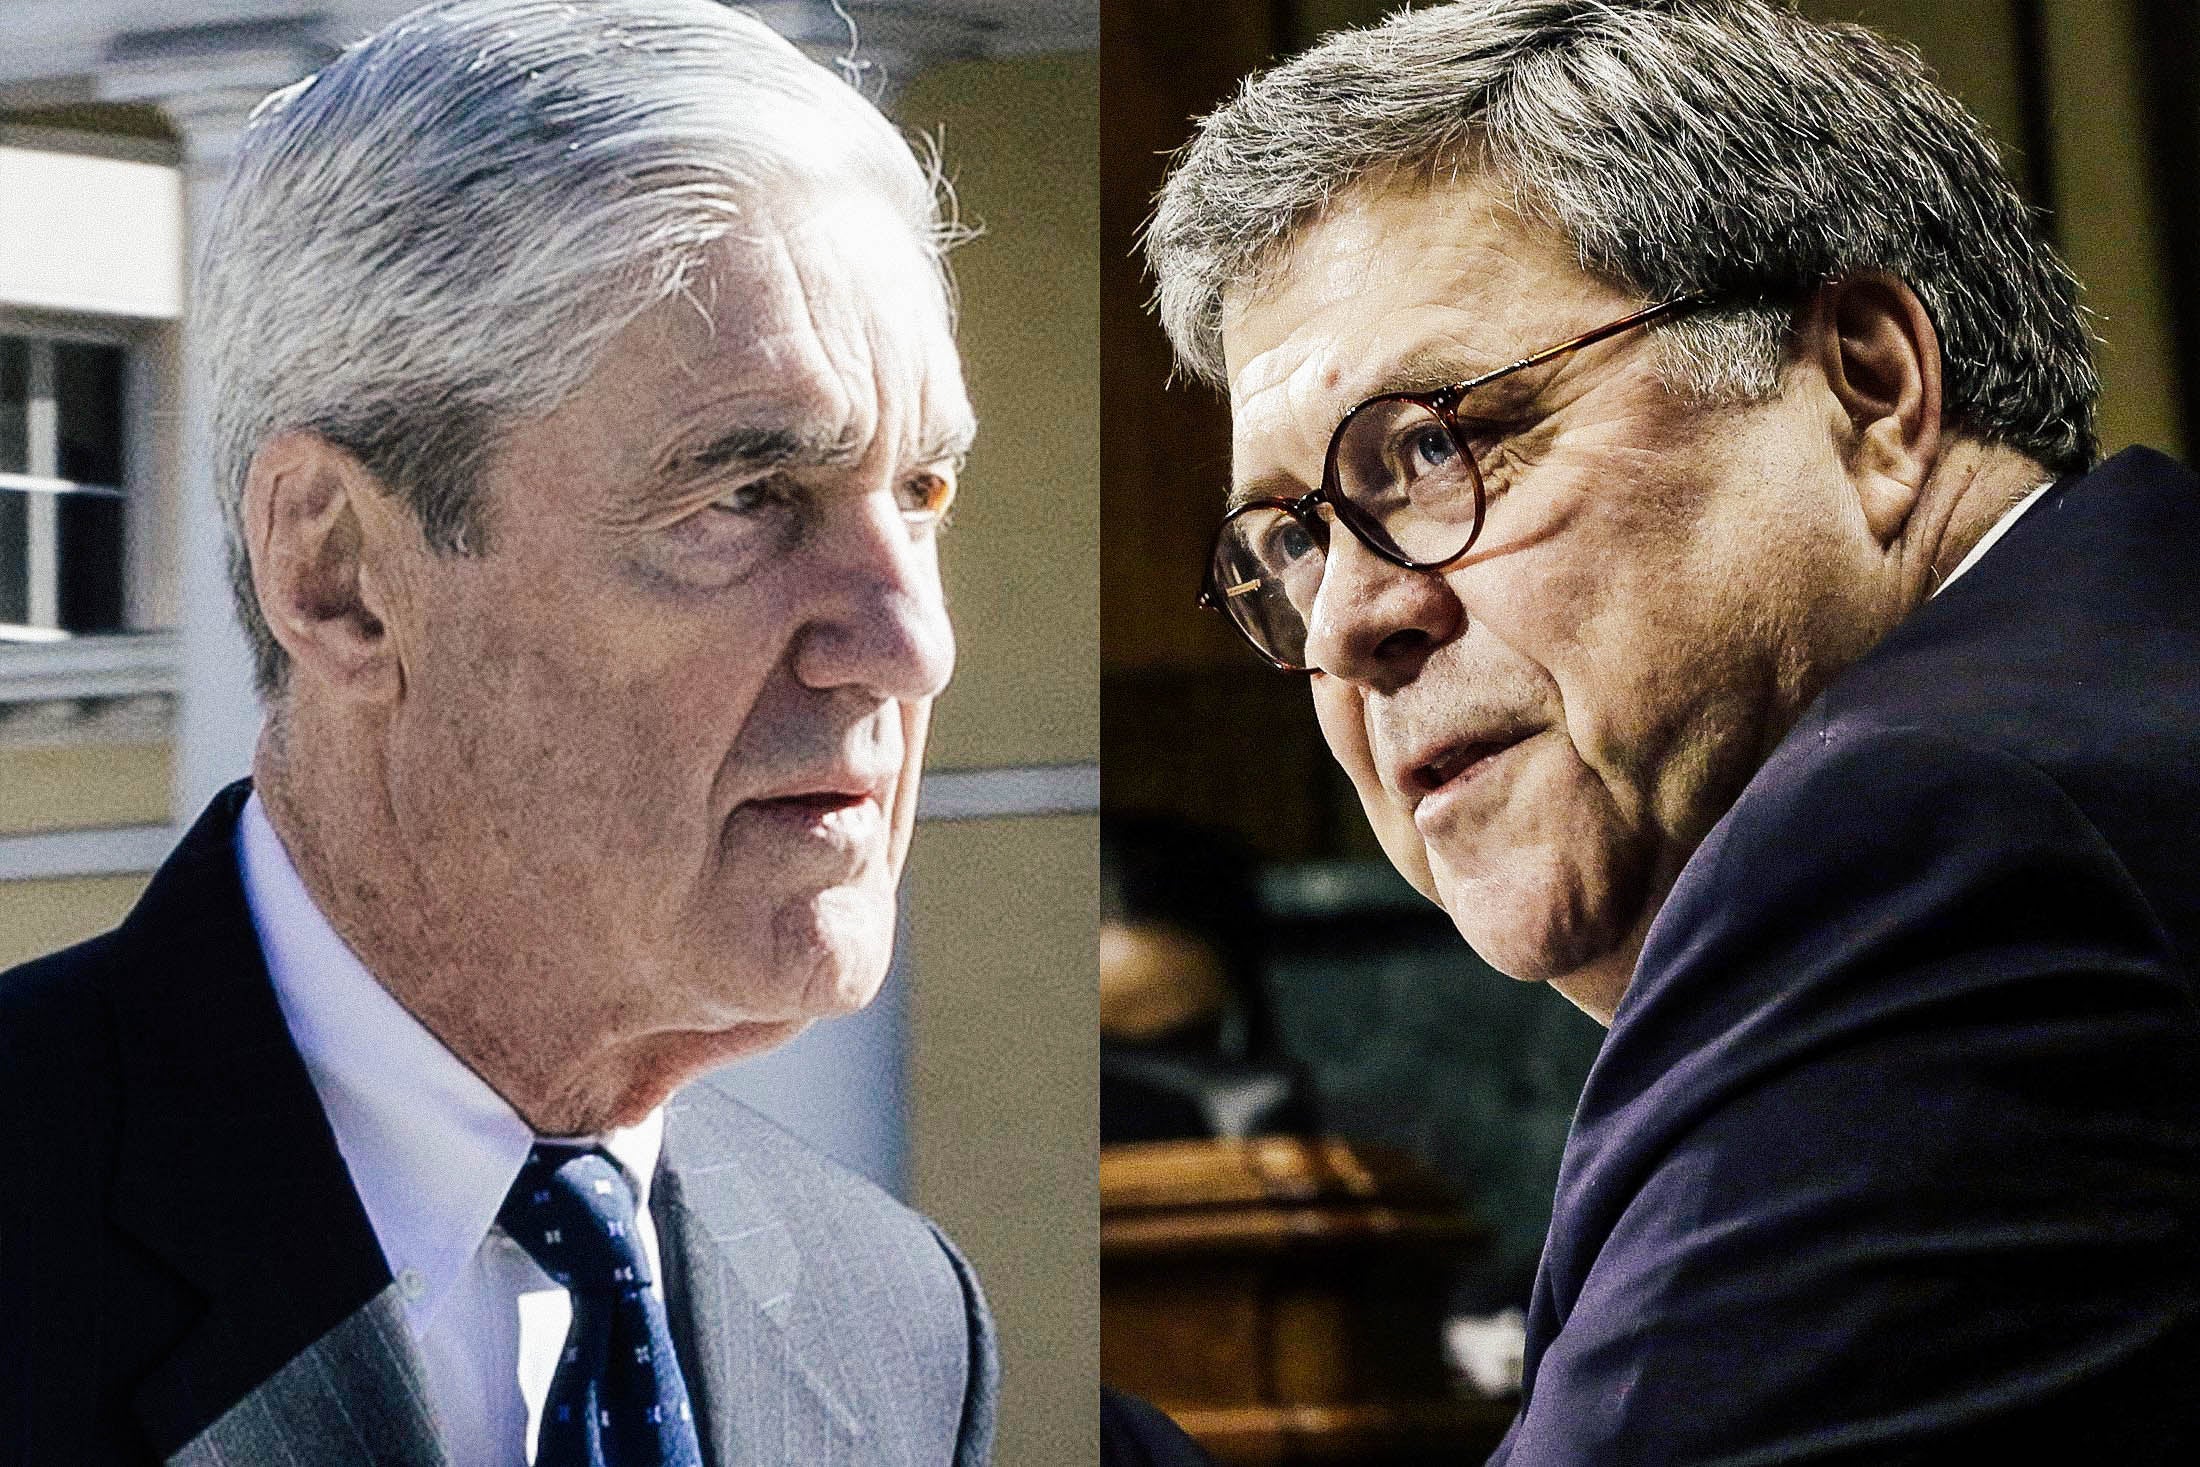 Composite illustration of Robert Mueller and William Barr both looking toward each other.